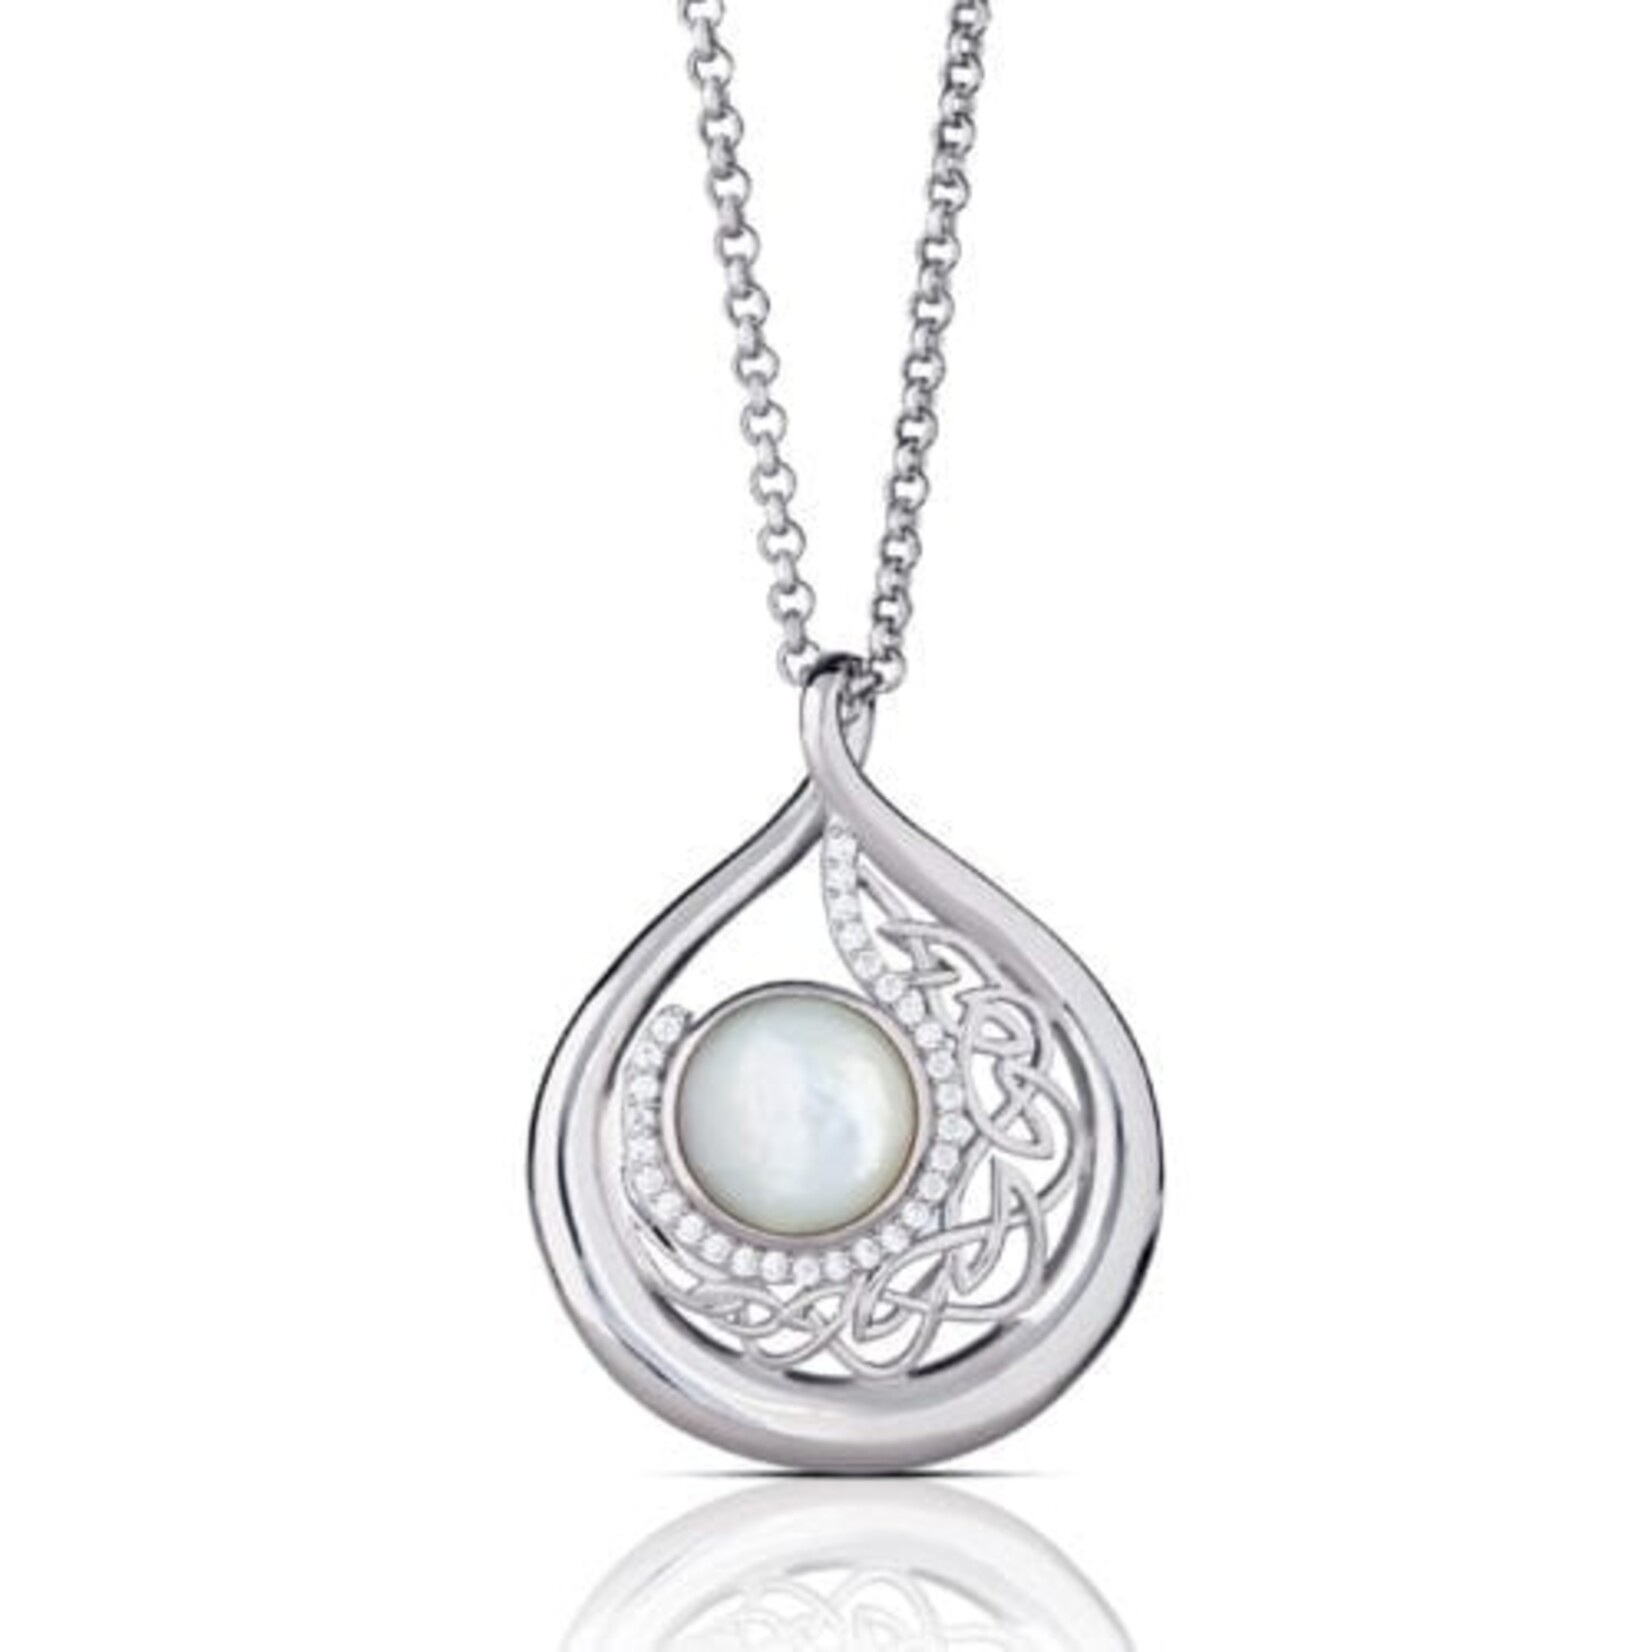 Boru Jewelry S/S Arian Mother of Pearl Teardrop Necklace